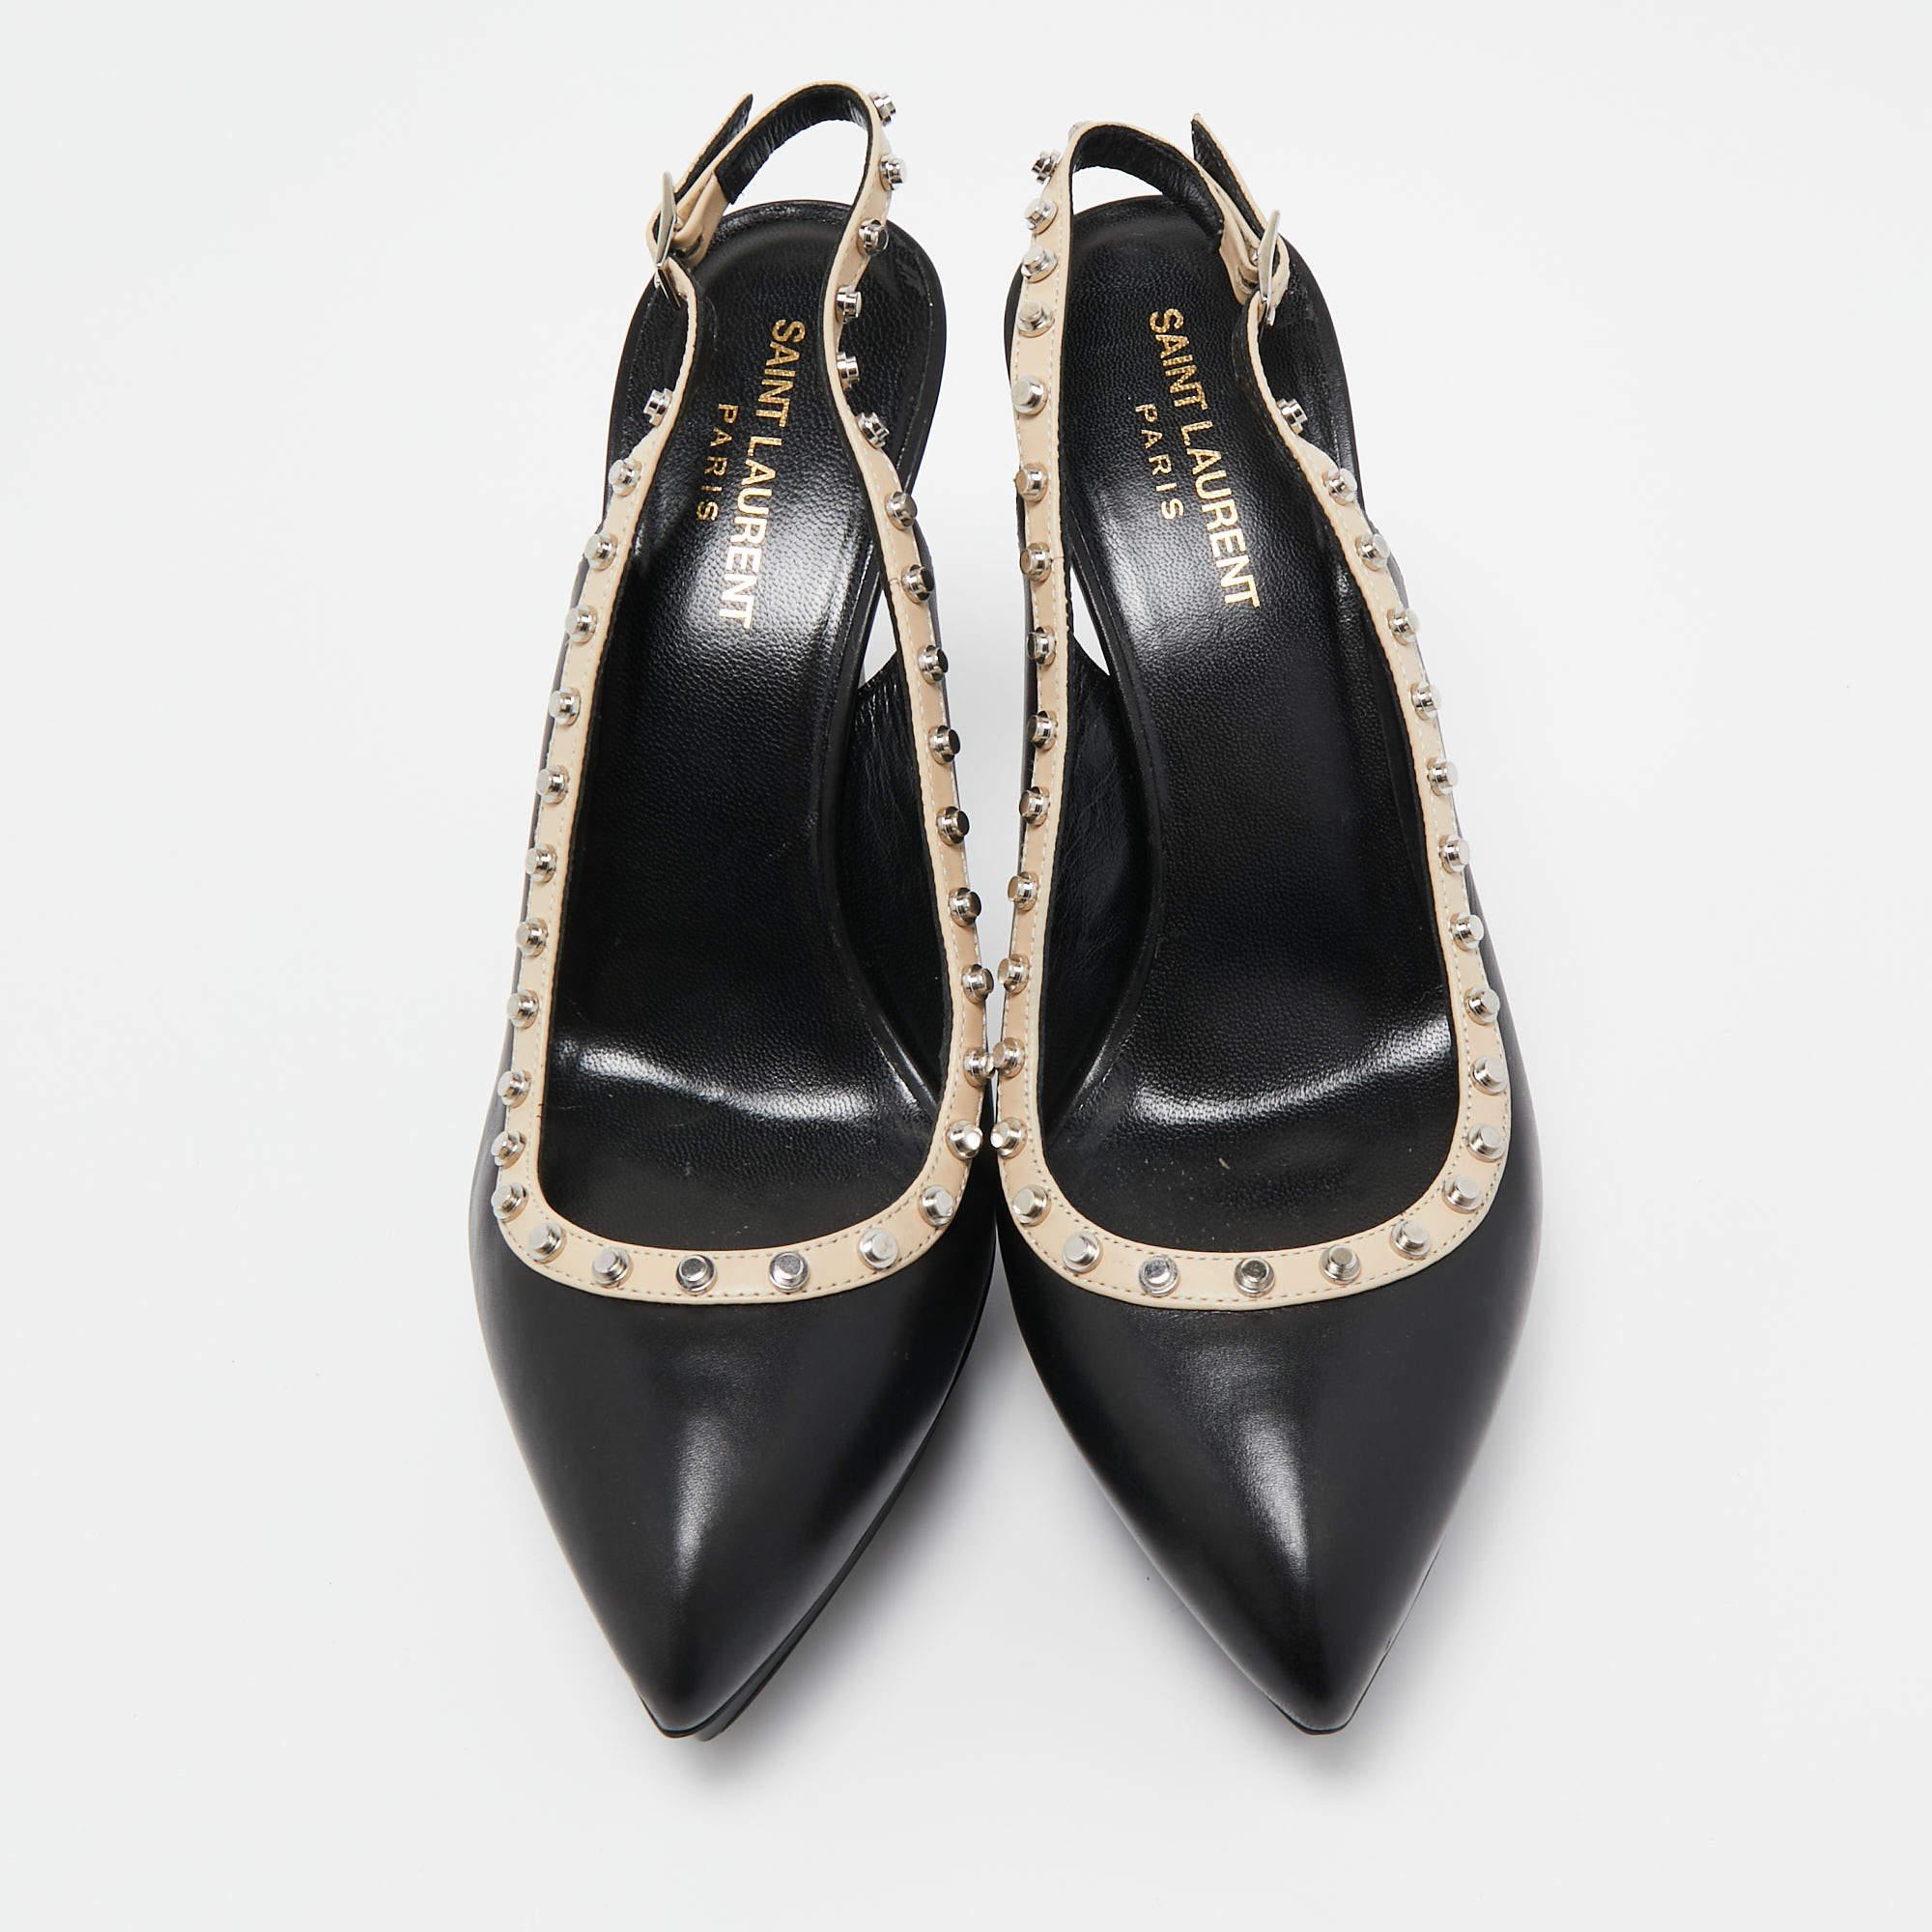 Exhibit an elegant style with this pair of pumps. These elegant shoes are crafted from quality materials. They are set on durable soles and sleek heels.

Includes: Original Dustbag, Original Box, Extra Heel Tips

